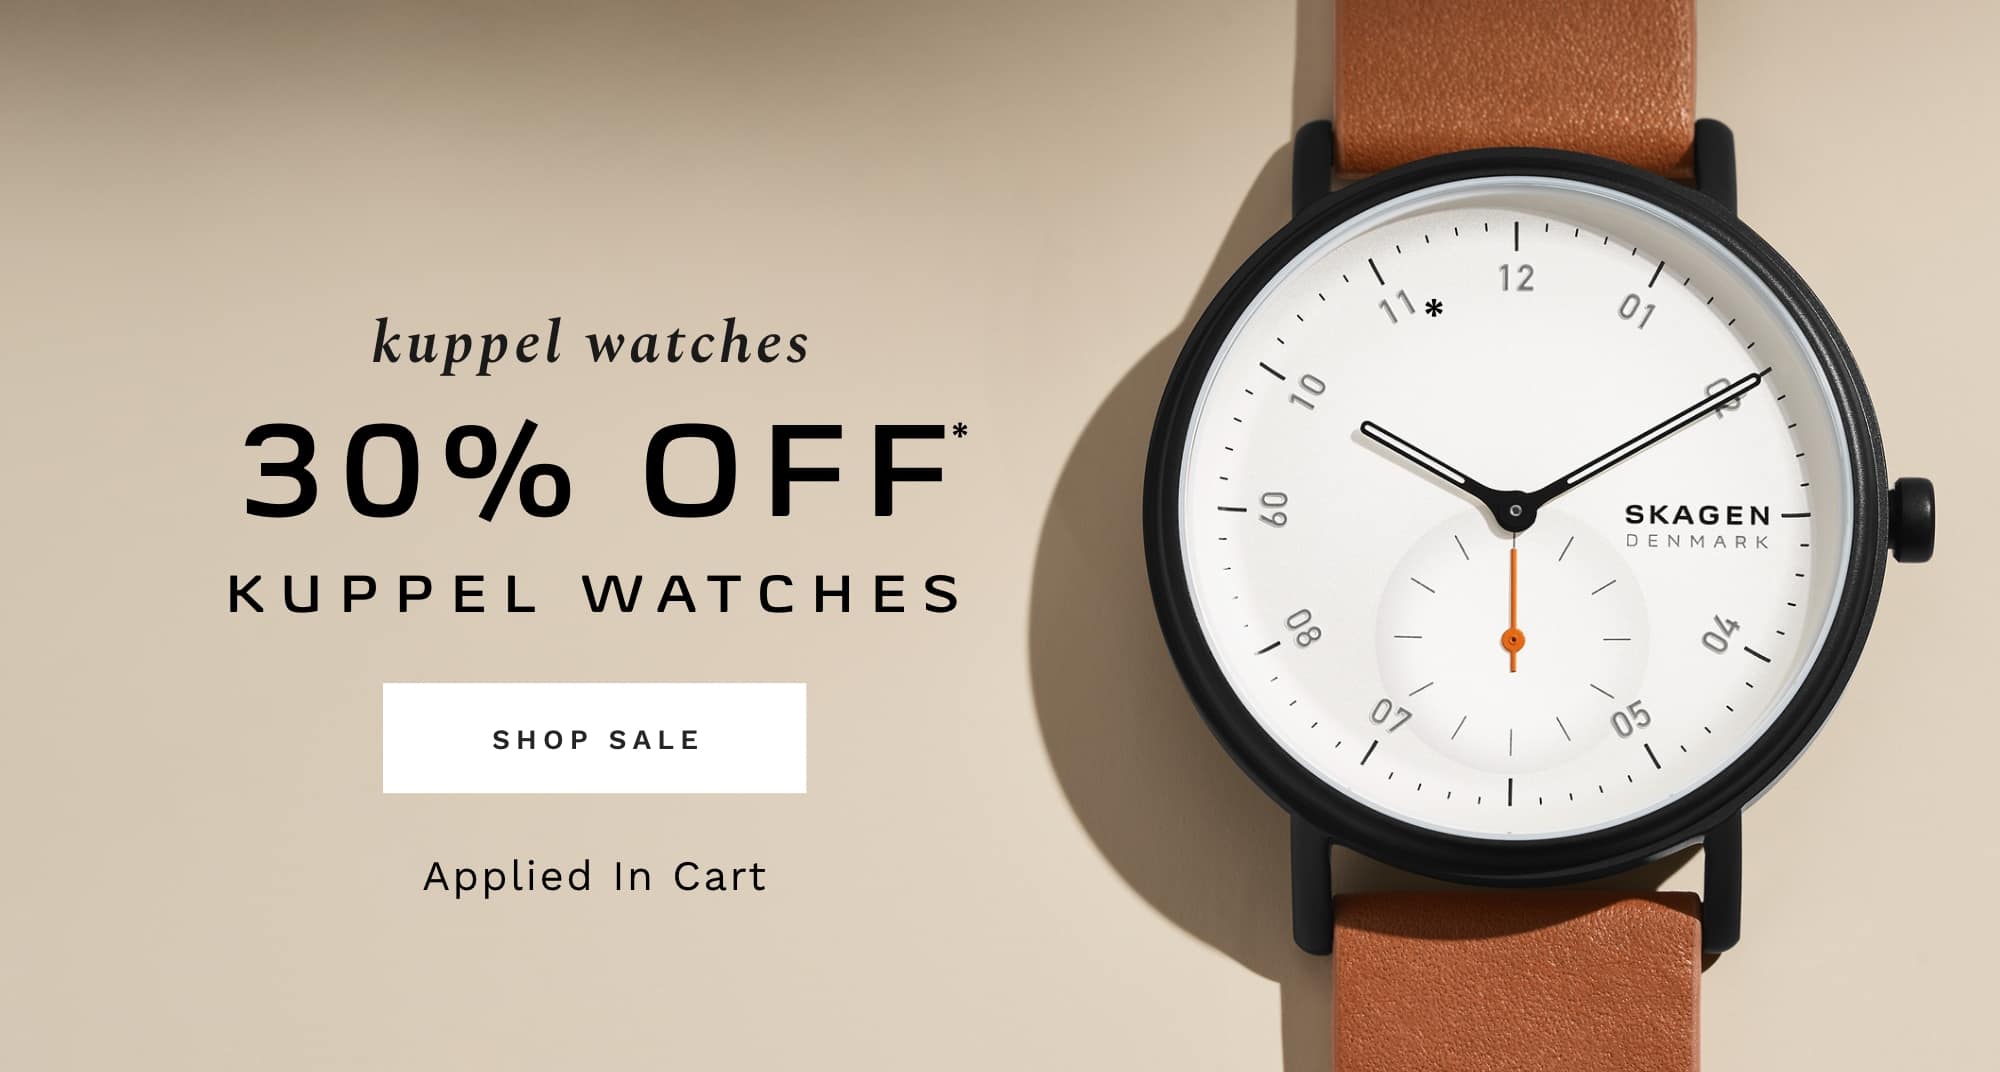 30% OFF* KUPPEL WATCHES